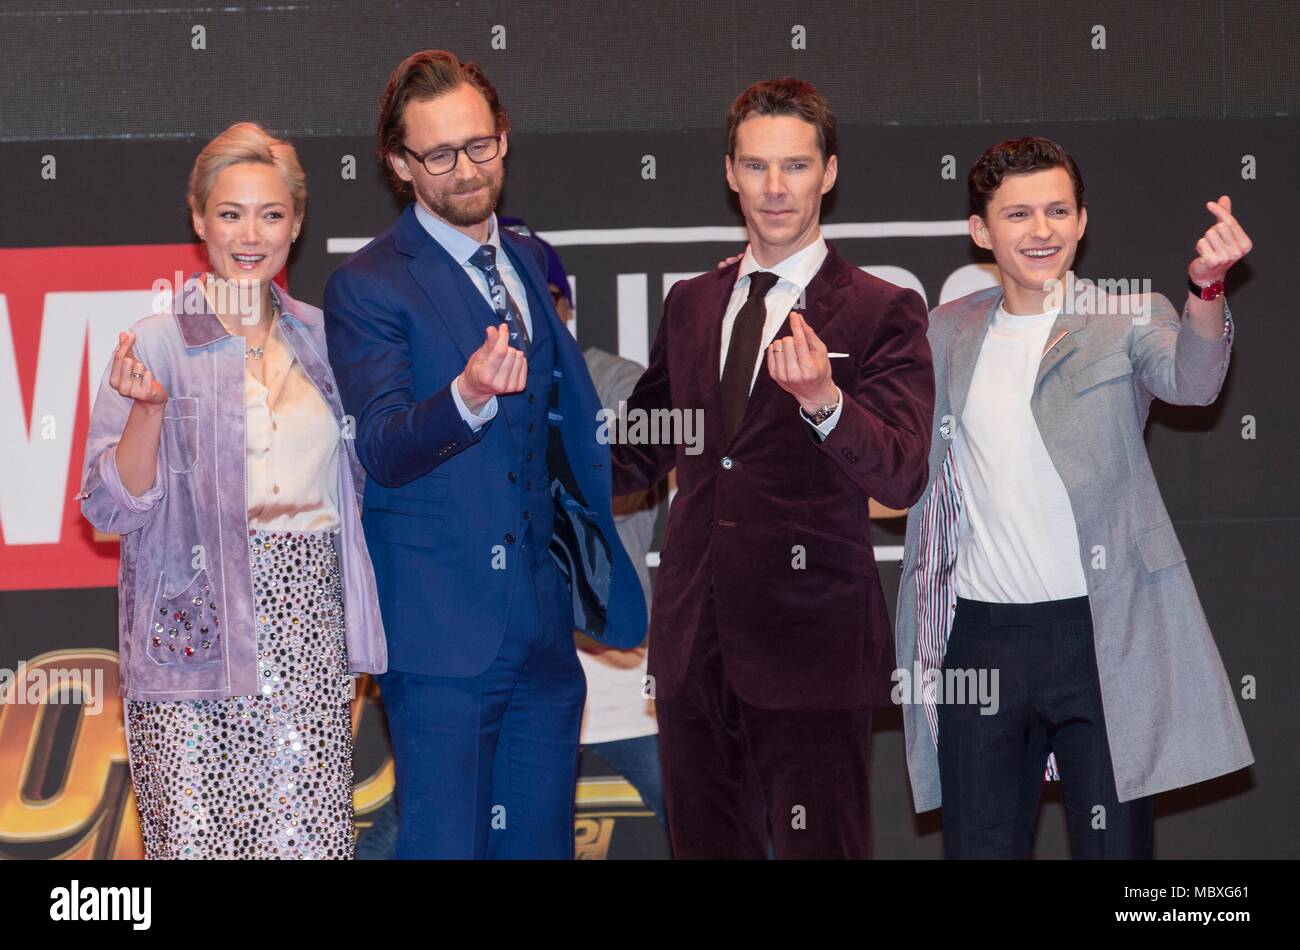 Seoul, South Korea. 12th Apr, 2018. Cast members of 'Avengers: Infinity War' Pom Klementieff, Tom Hiddleston, Benedict Cumberbatch and Tom Holland (from L to R) cross their fingers to form the heartshape to fans during a promotion event for the film in Seoul, South Korea, April 12, 2018. Credit: Lee Sang-ho/Xinhua/Alamy Live News Stock Photo